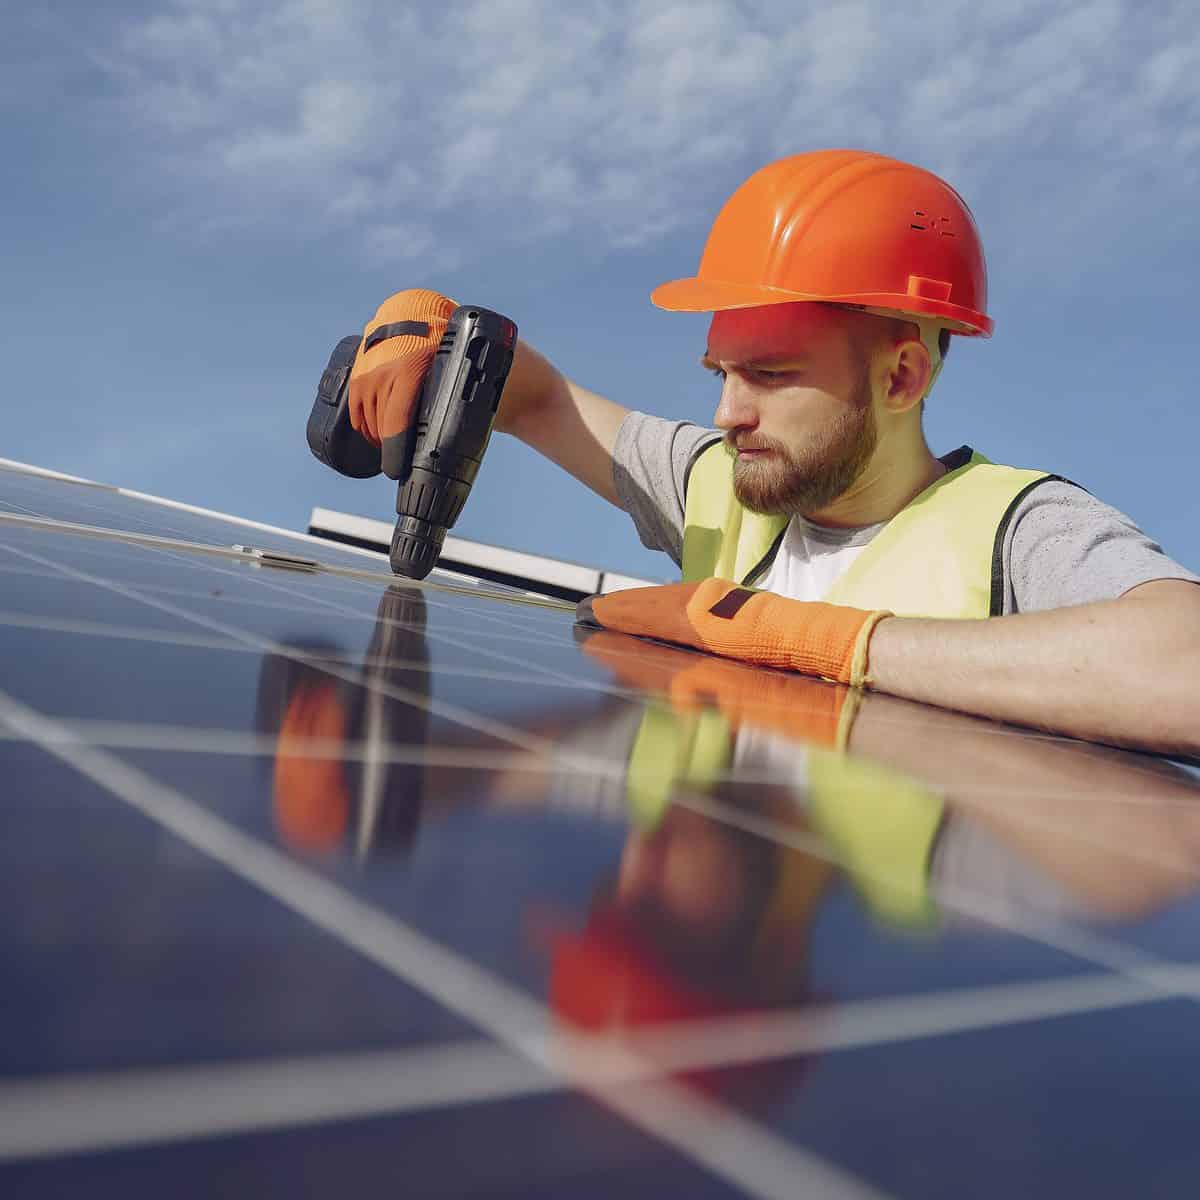 An electrician installing a solar panel